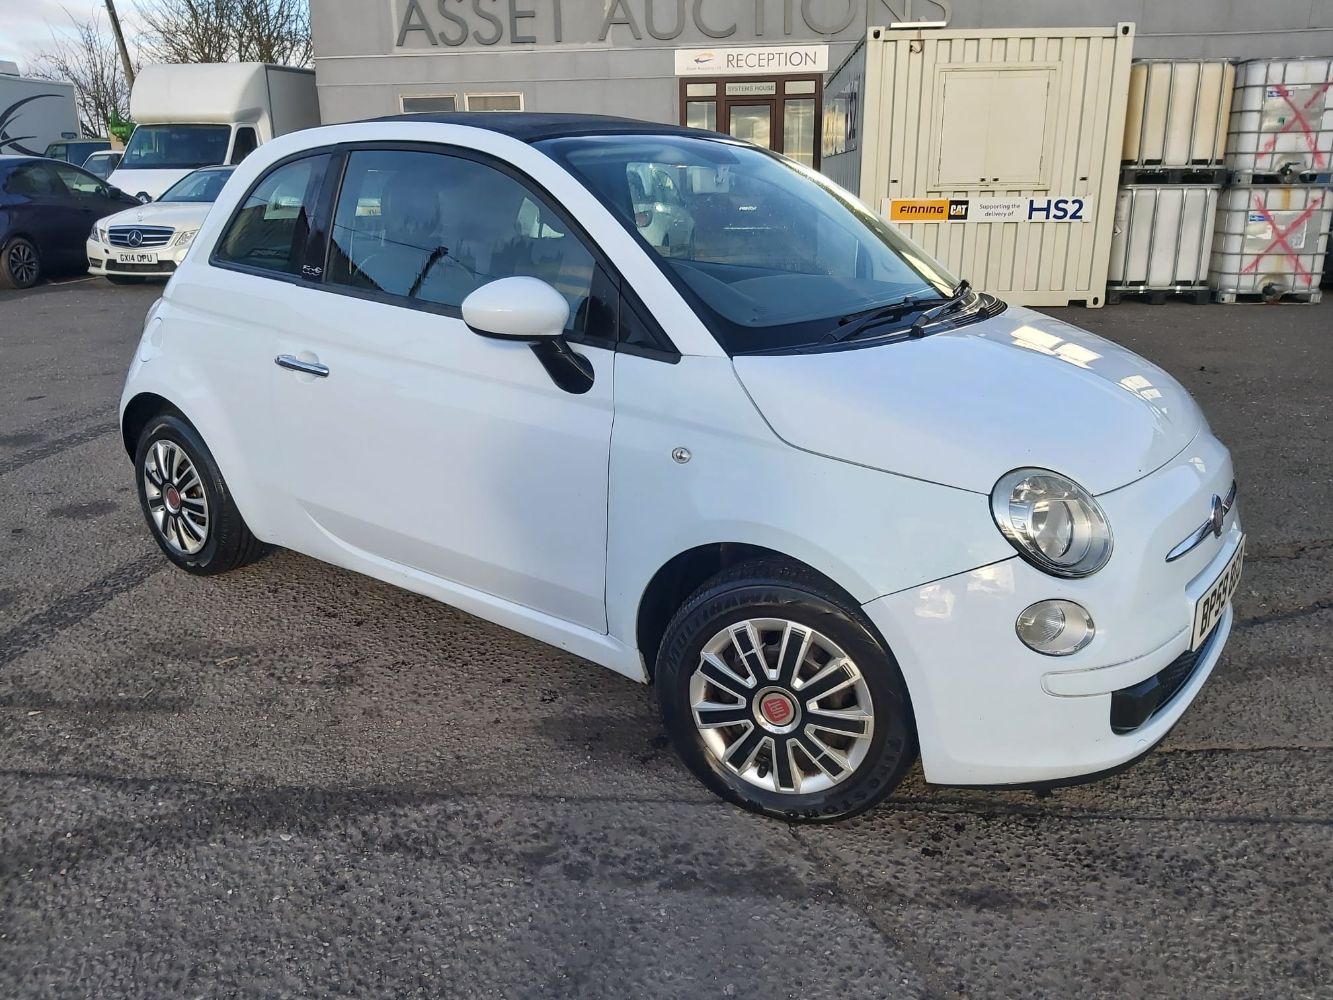 ENDS WEDNESDAY 11am! FIAT 500 CONVERTIBLE, SSANGYONG TIVOLI EX, COMPRESSOR, ELECTRIC LIFTS, FORKLIFTS, VANS & COMMERCIAL VEHICLES PLUS MUCH MORE